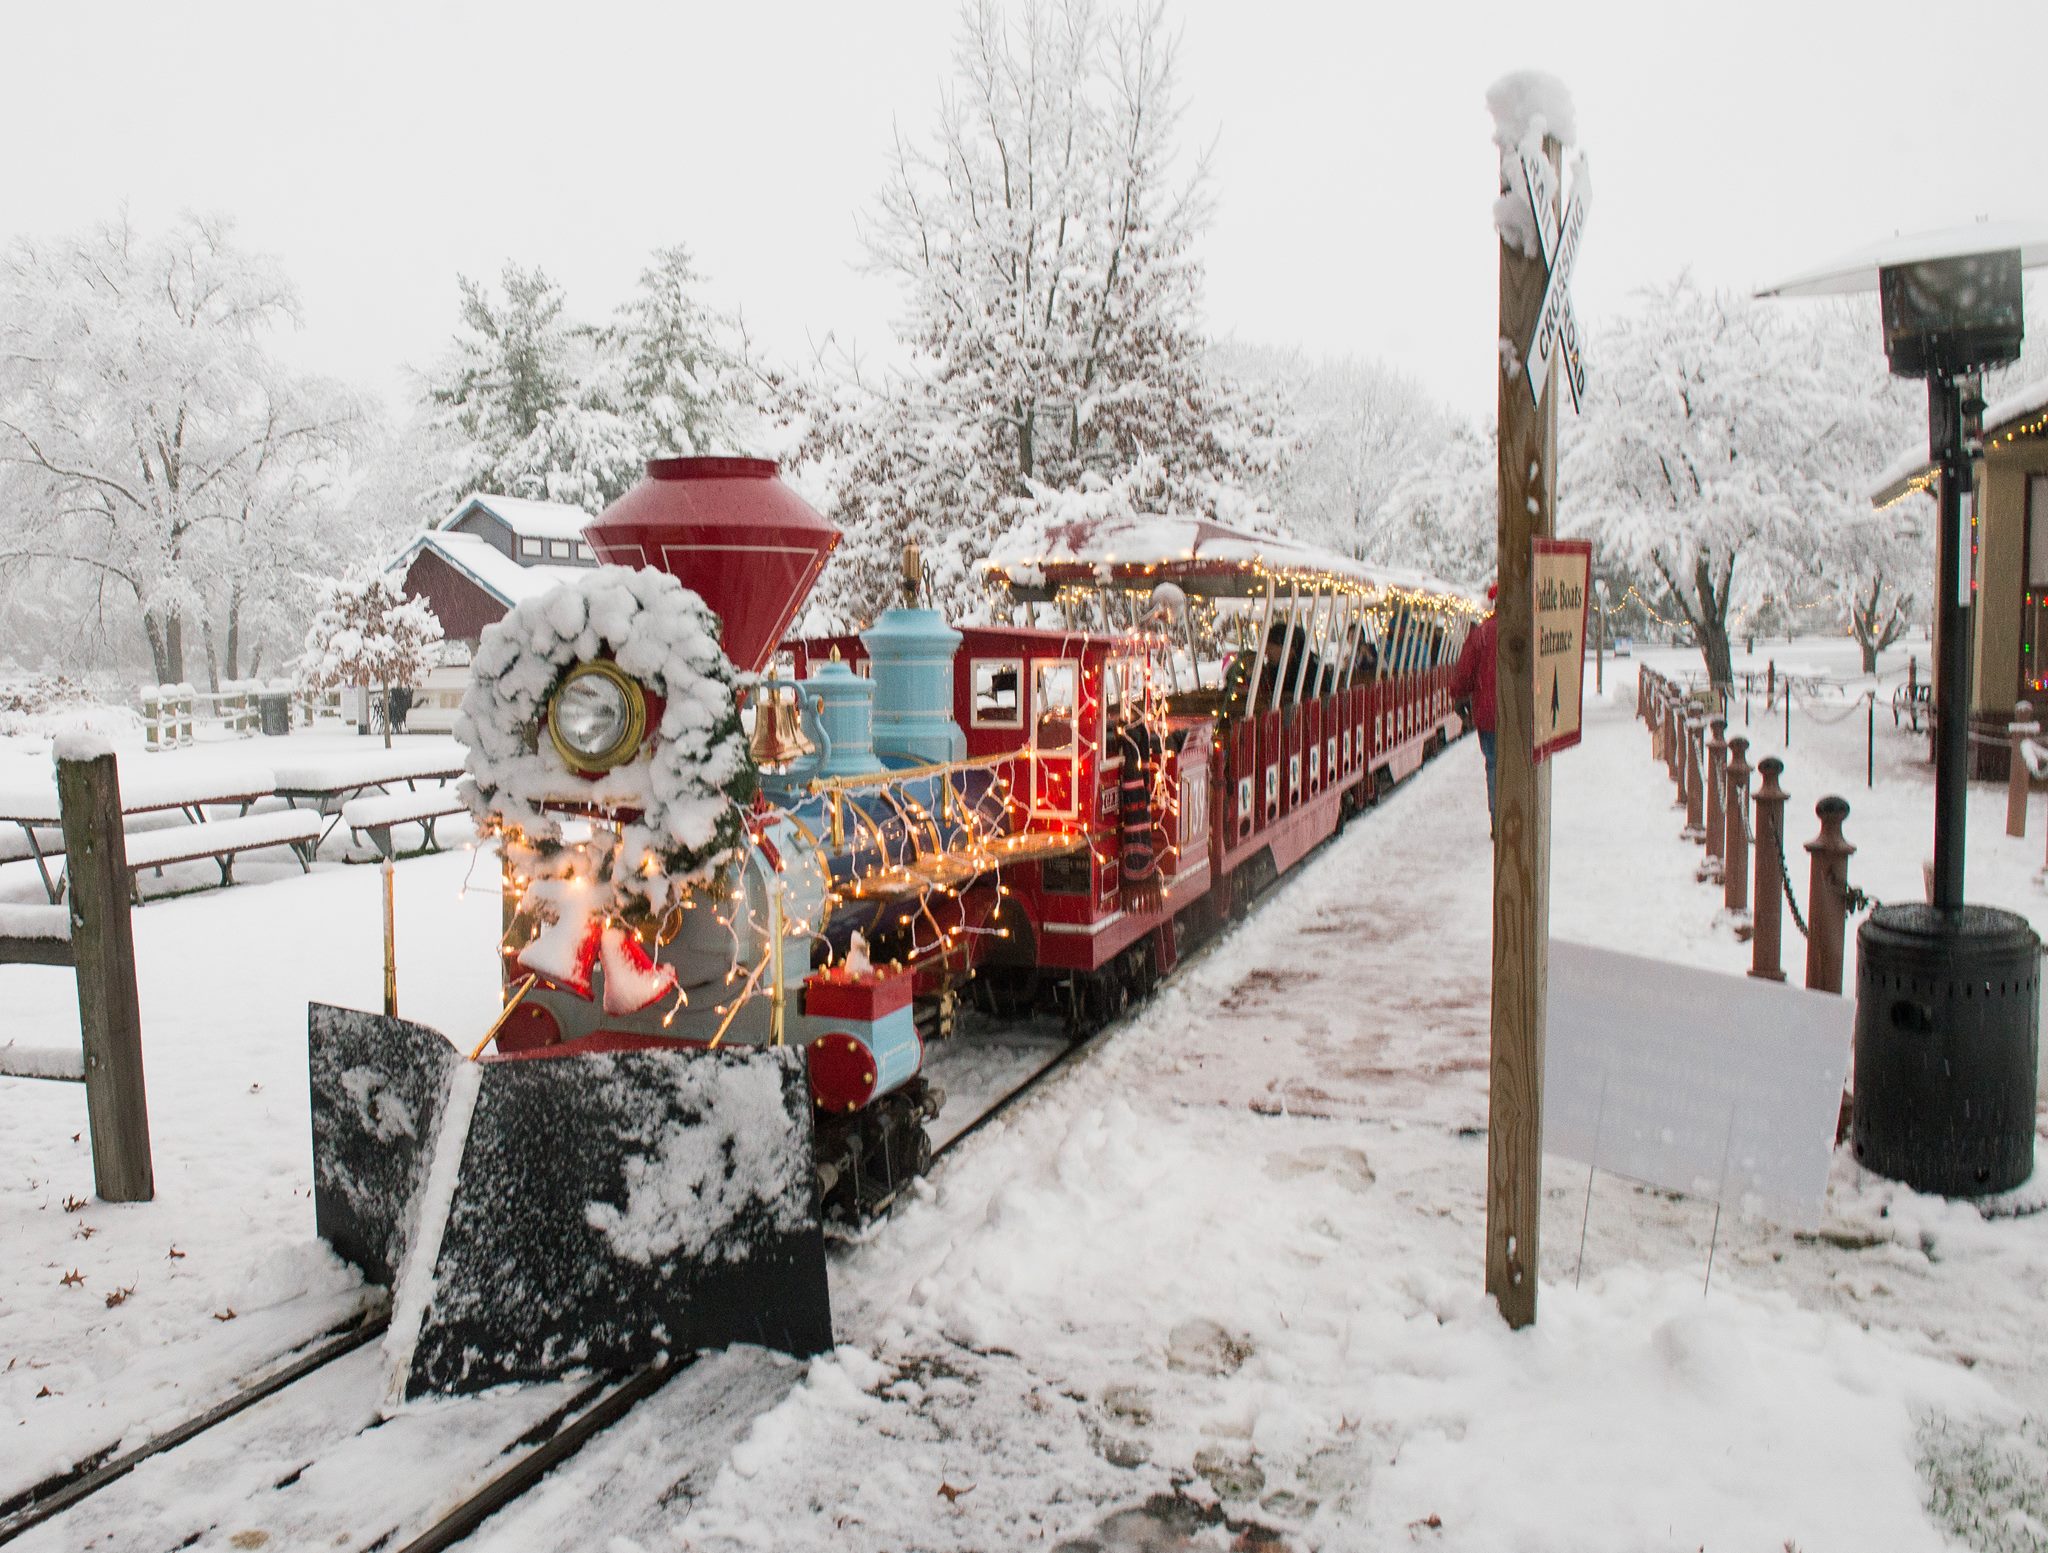 Blackberry Farm Holiday Express Is Best North Pole Train ...